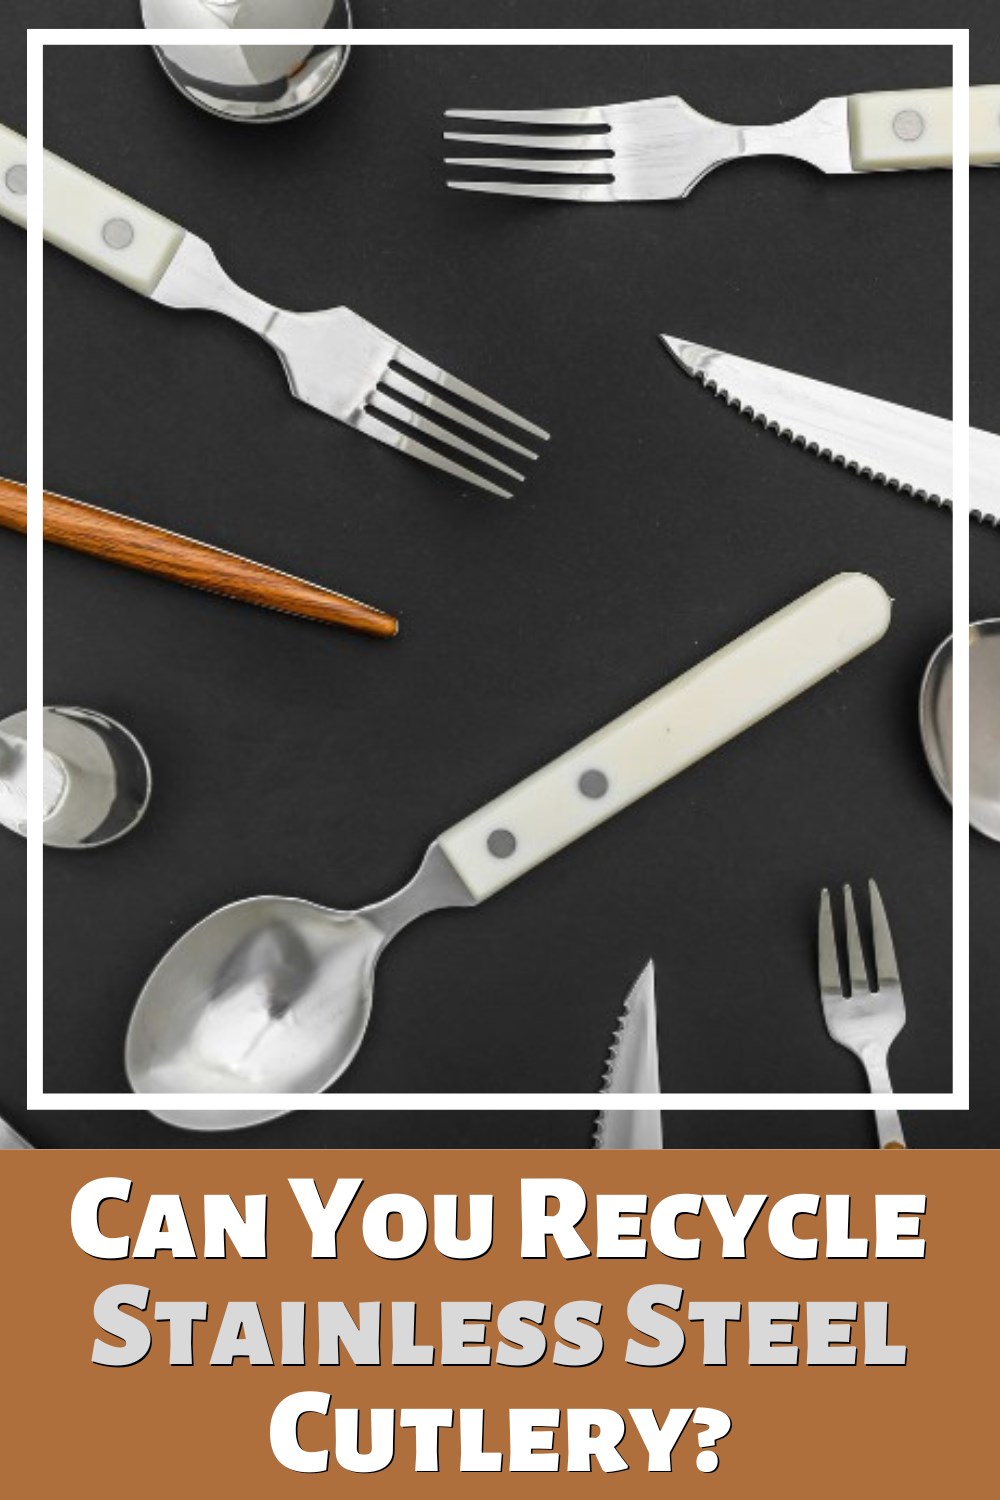 Yes you can recycle stainless-steel cutlery